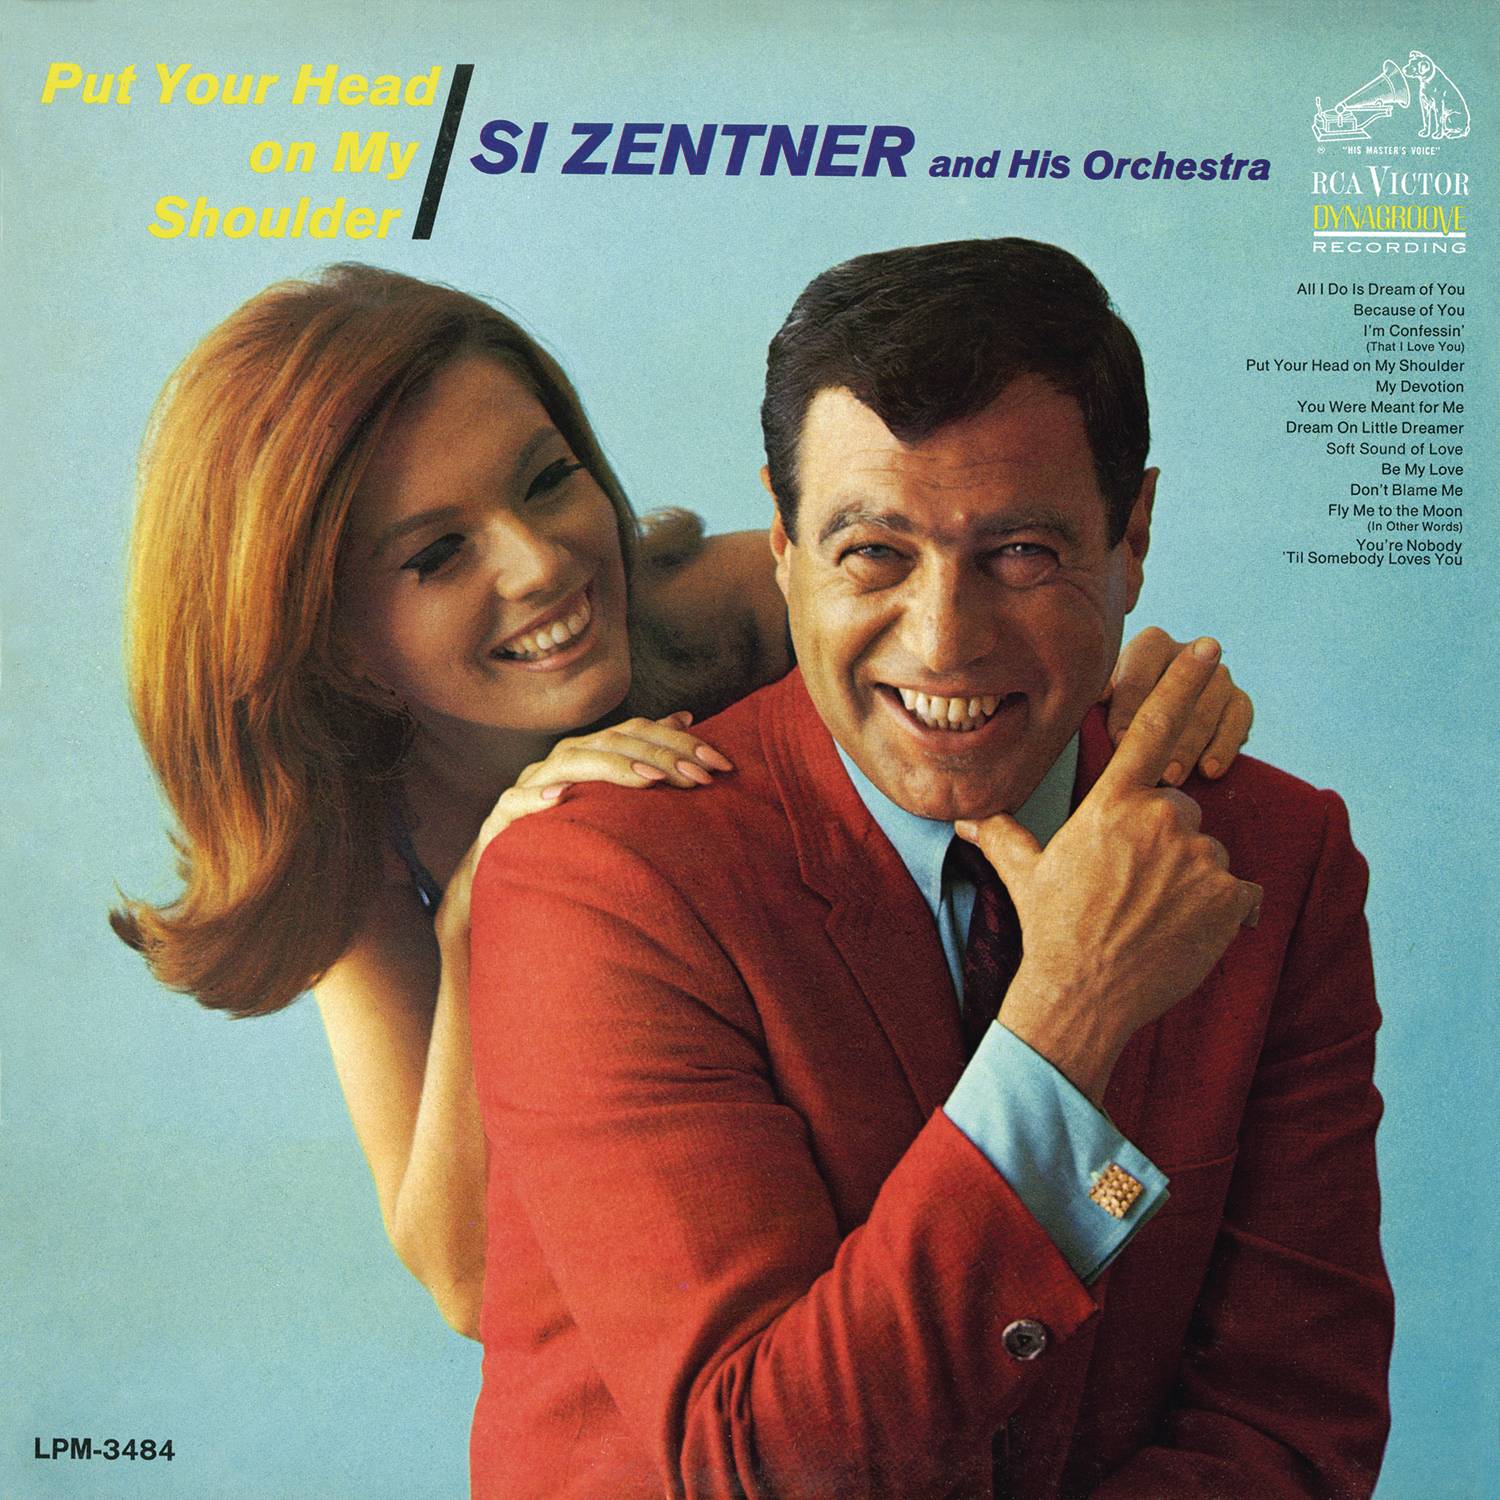 Si Zentner And His Orchestra - Put Your Head On My Shoulder (1966/2015) [AcousticSounds FLAC 24bit/96kHz]